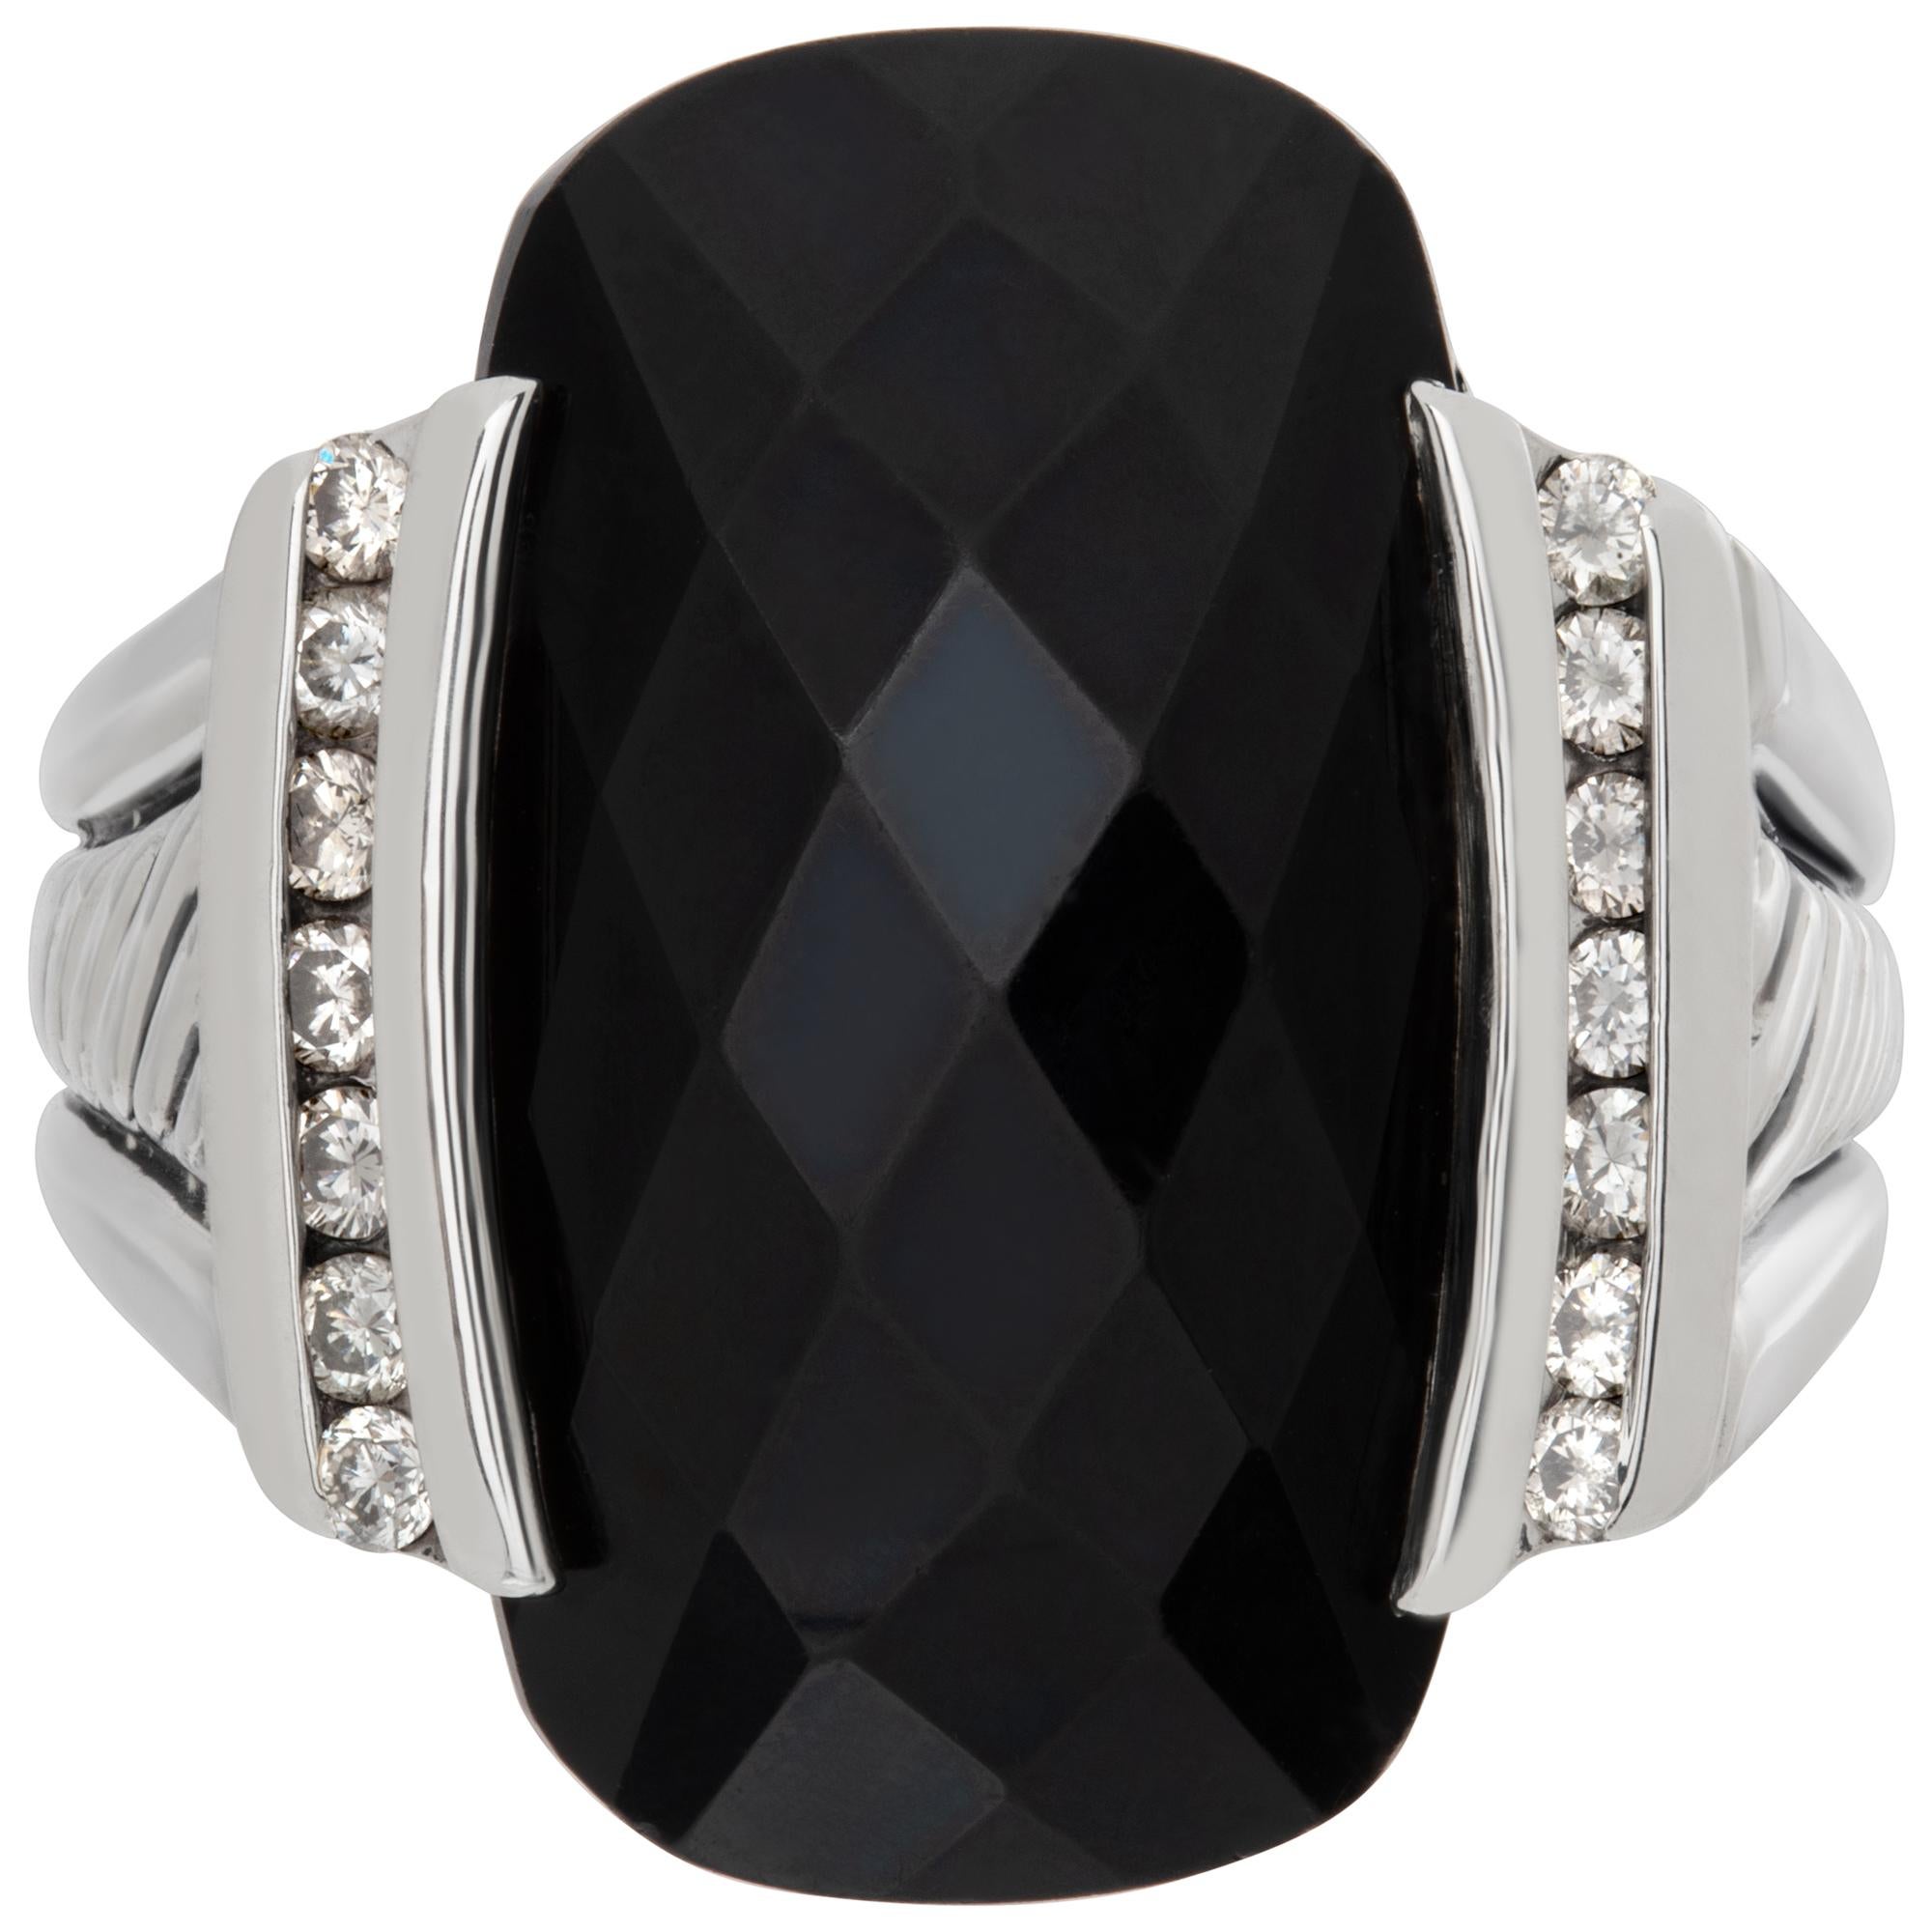 David Yurman black onyx ring with side diamond accents set in 925 sterling silver with trademark cable pattern on shank. Brilliant cut onyx stone measurements 7/8 x 1/2